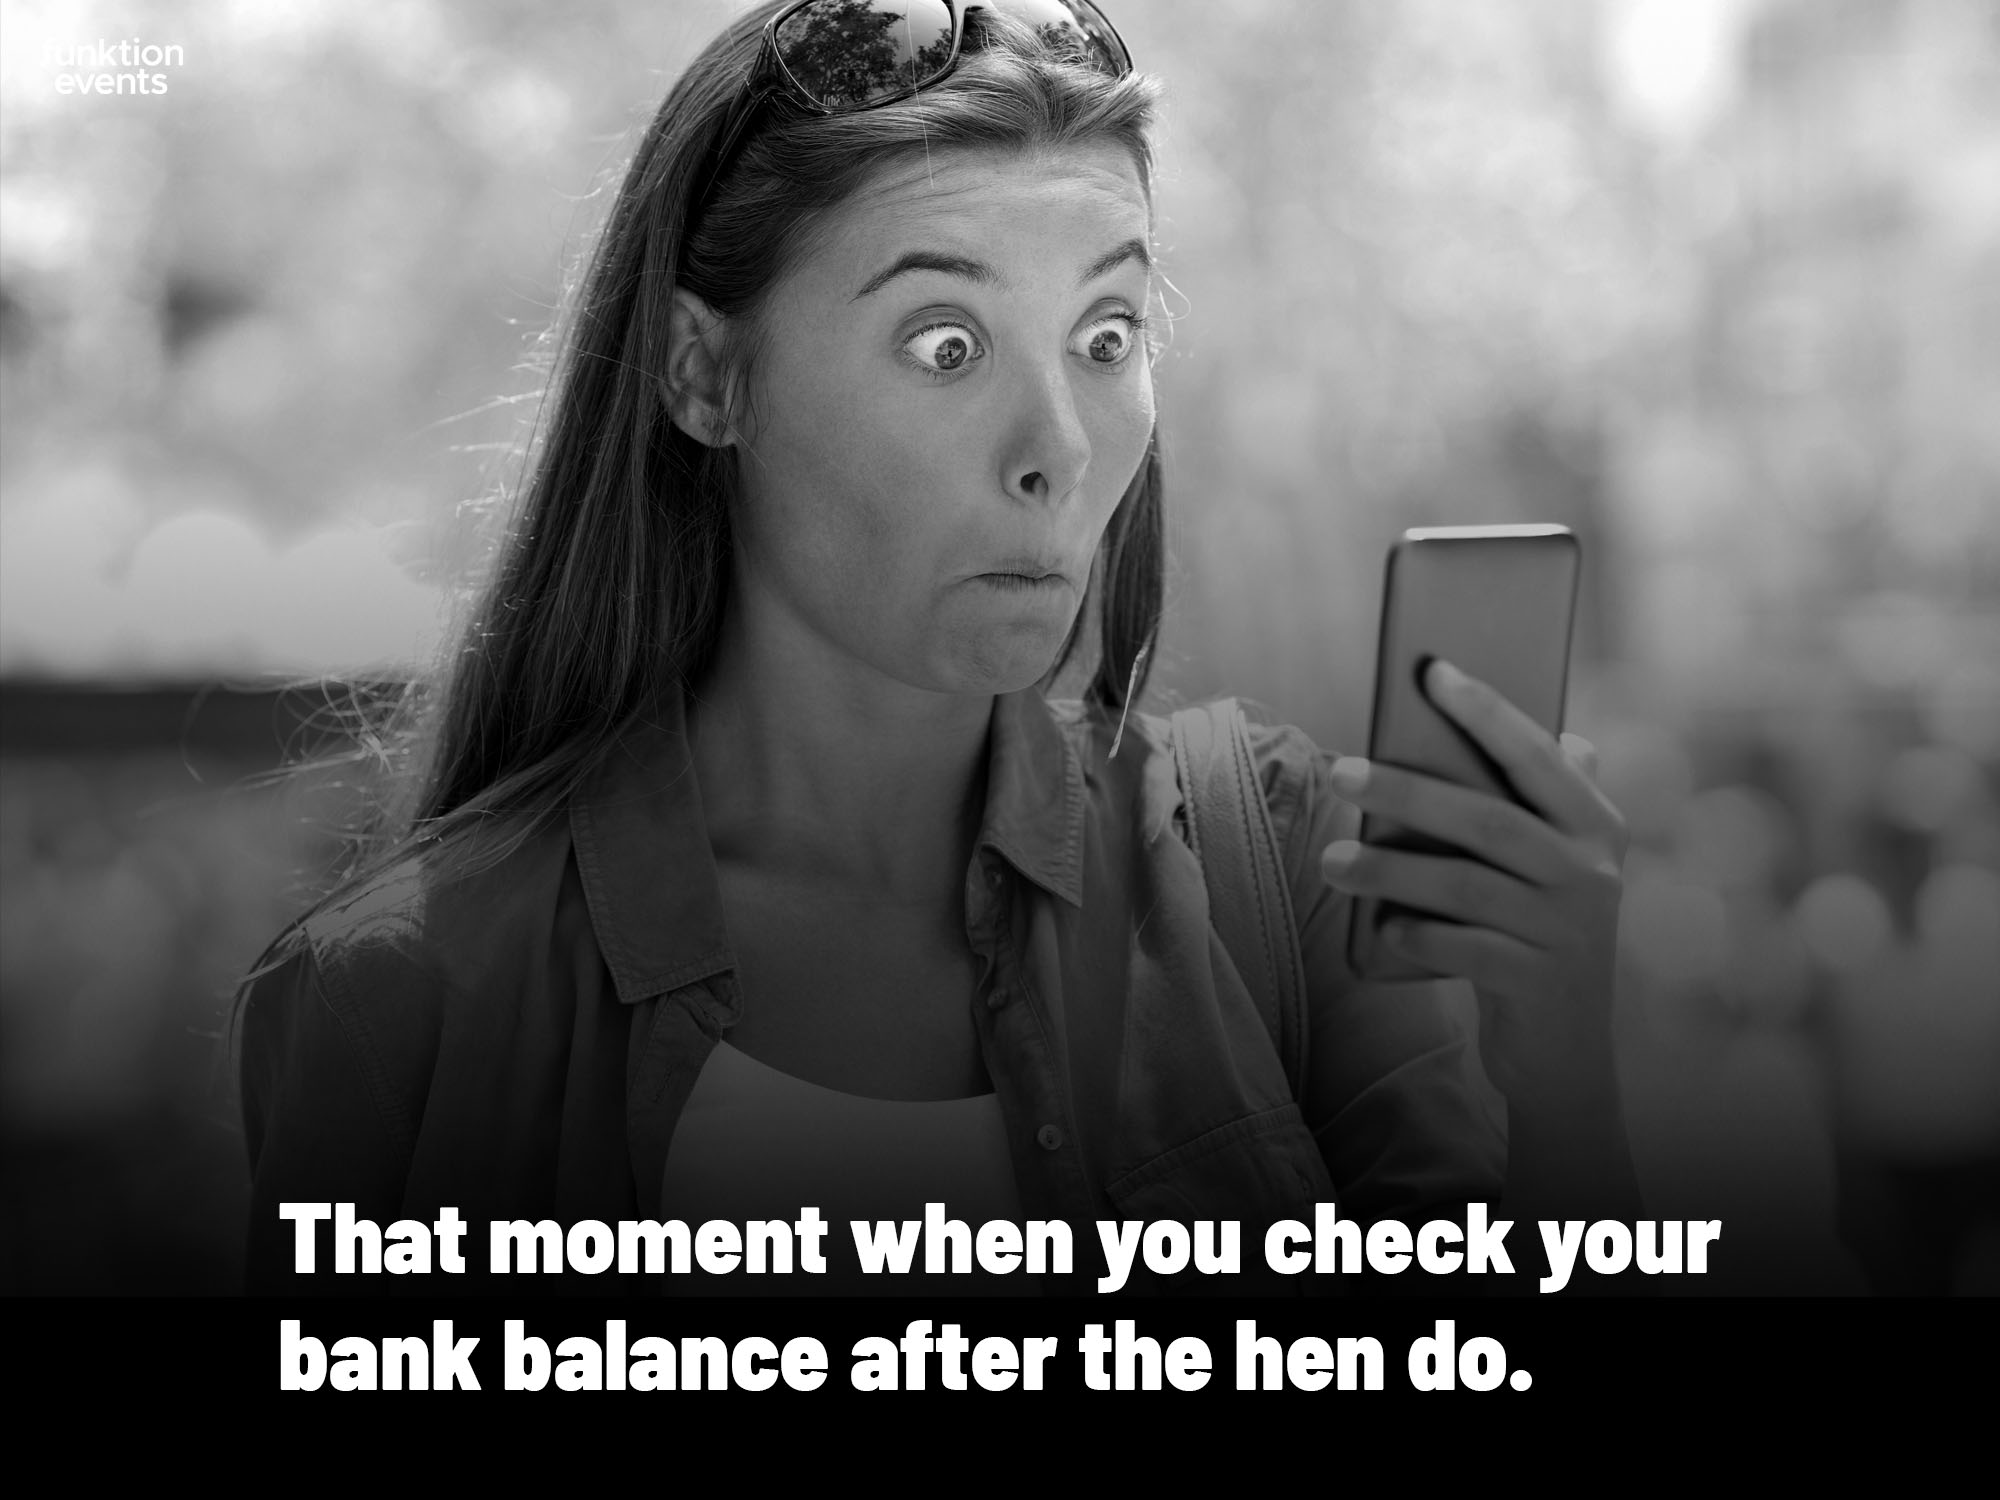 That moment when you check your bank balance after the hen party - Meme 3